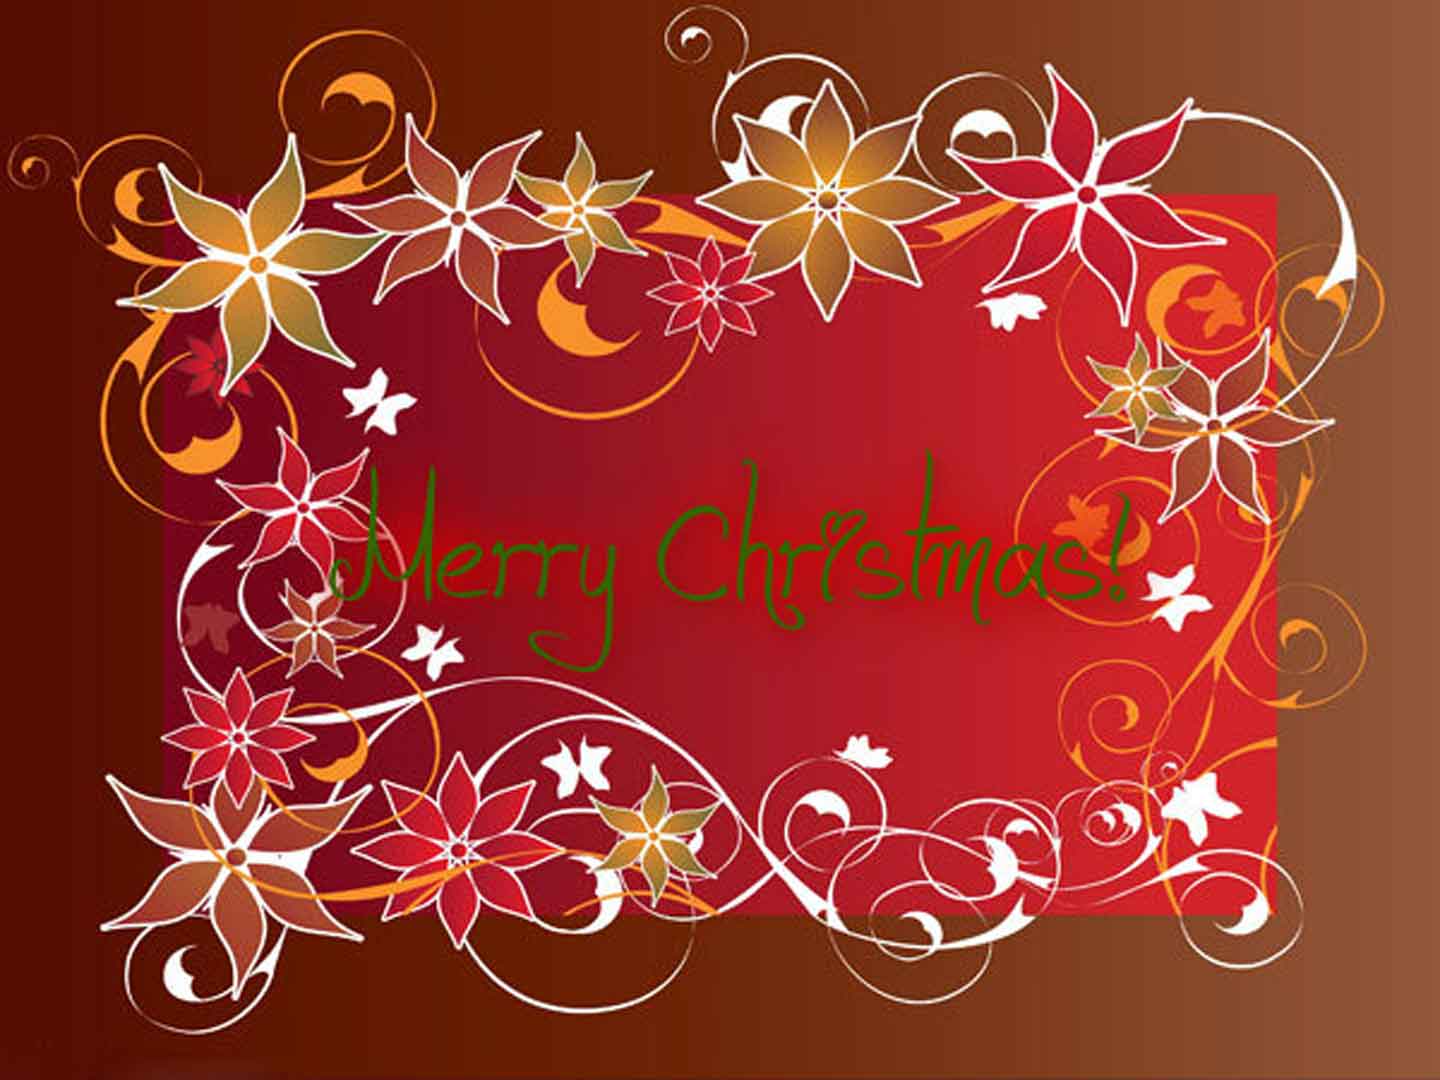 Christmas Cards 2012: Merry Christmas Greeting Cards Free Download